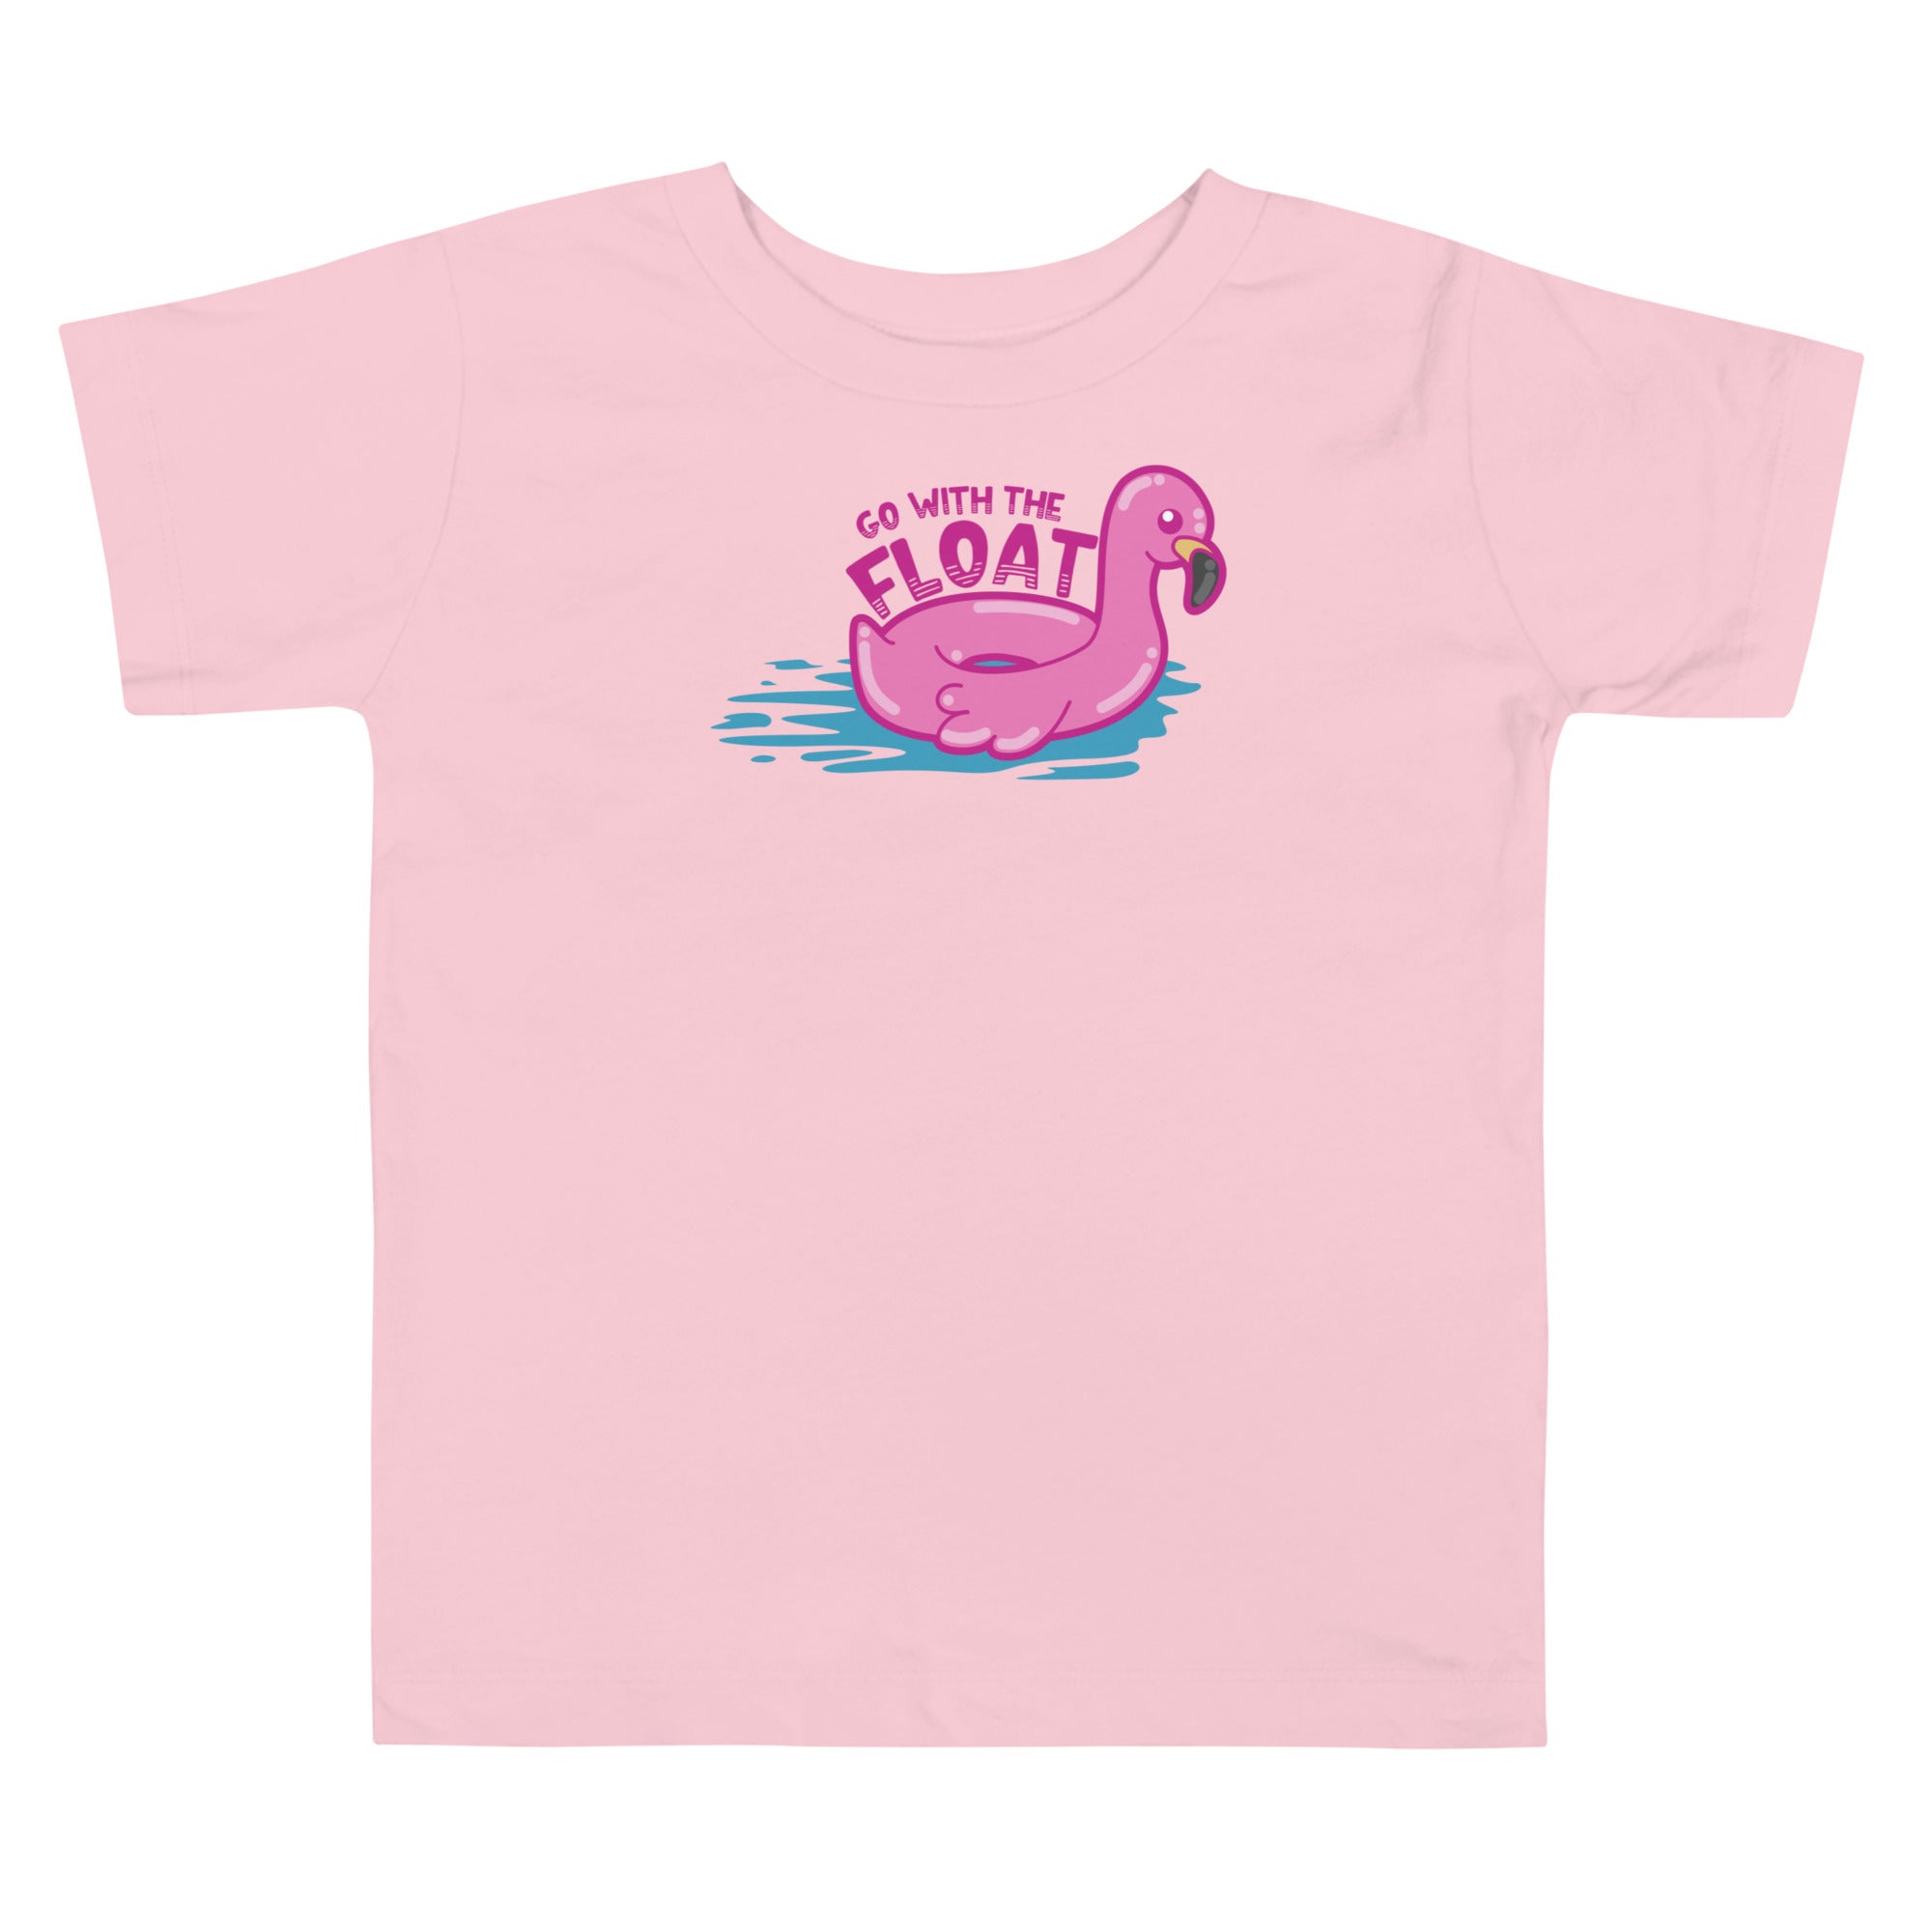 GO WITH THE FLOAT - Toddler Tee - ChubbleGumLLC